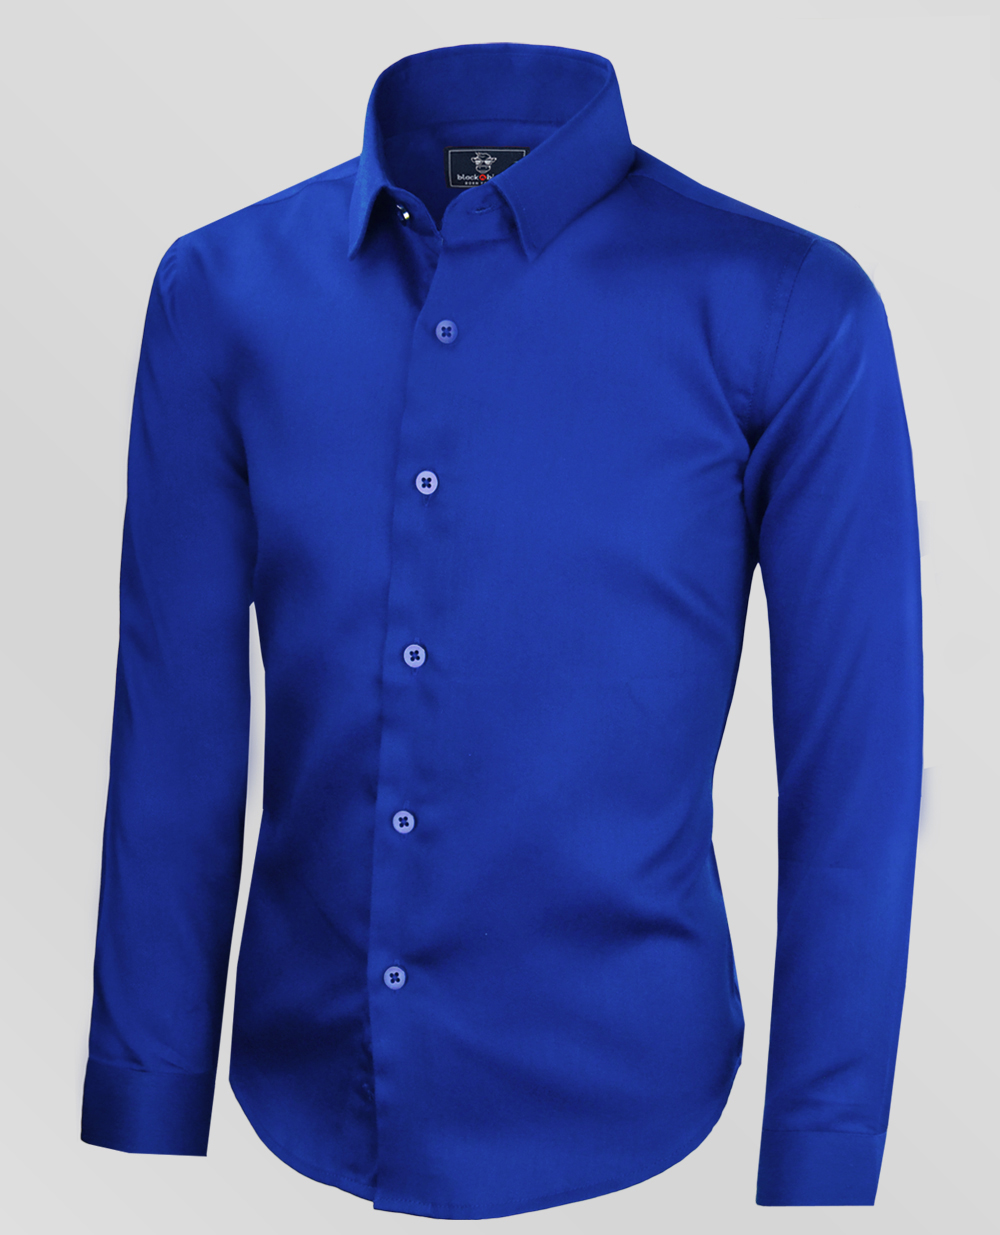 Men's Casual Fashion Long-sleeved Slim-fit Formal Shirt 6 Colors